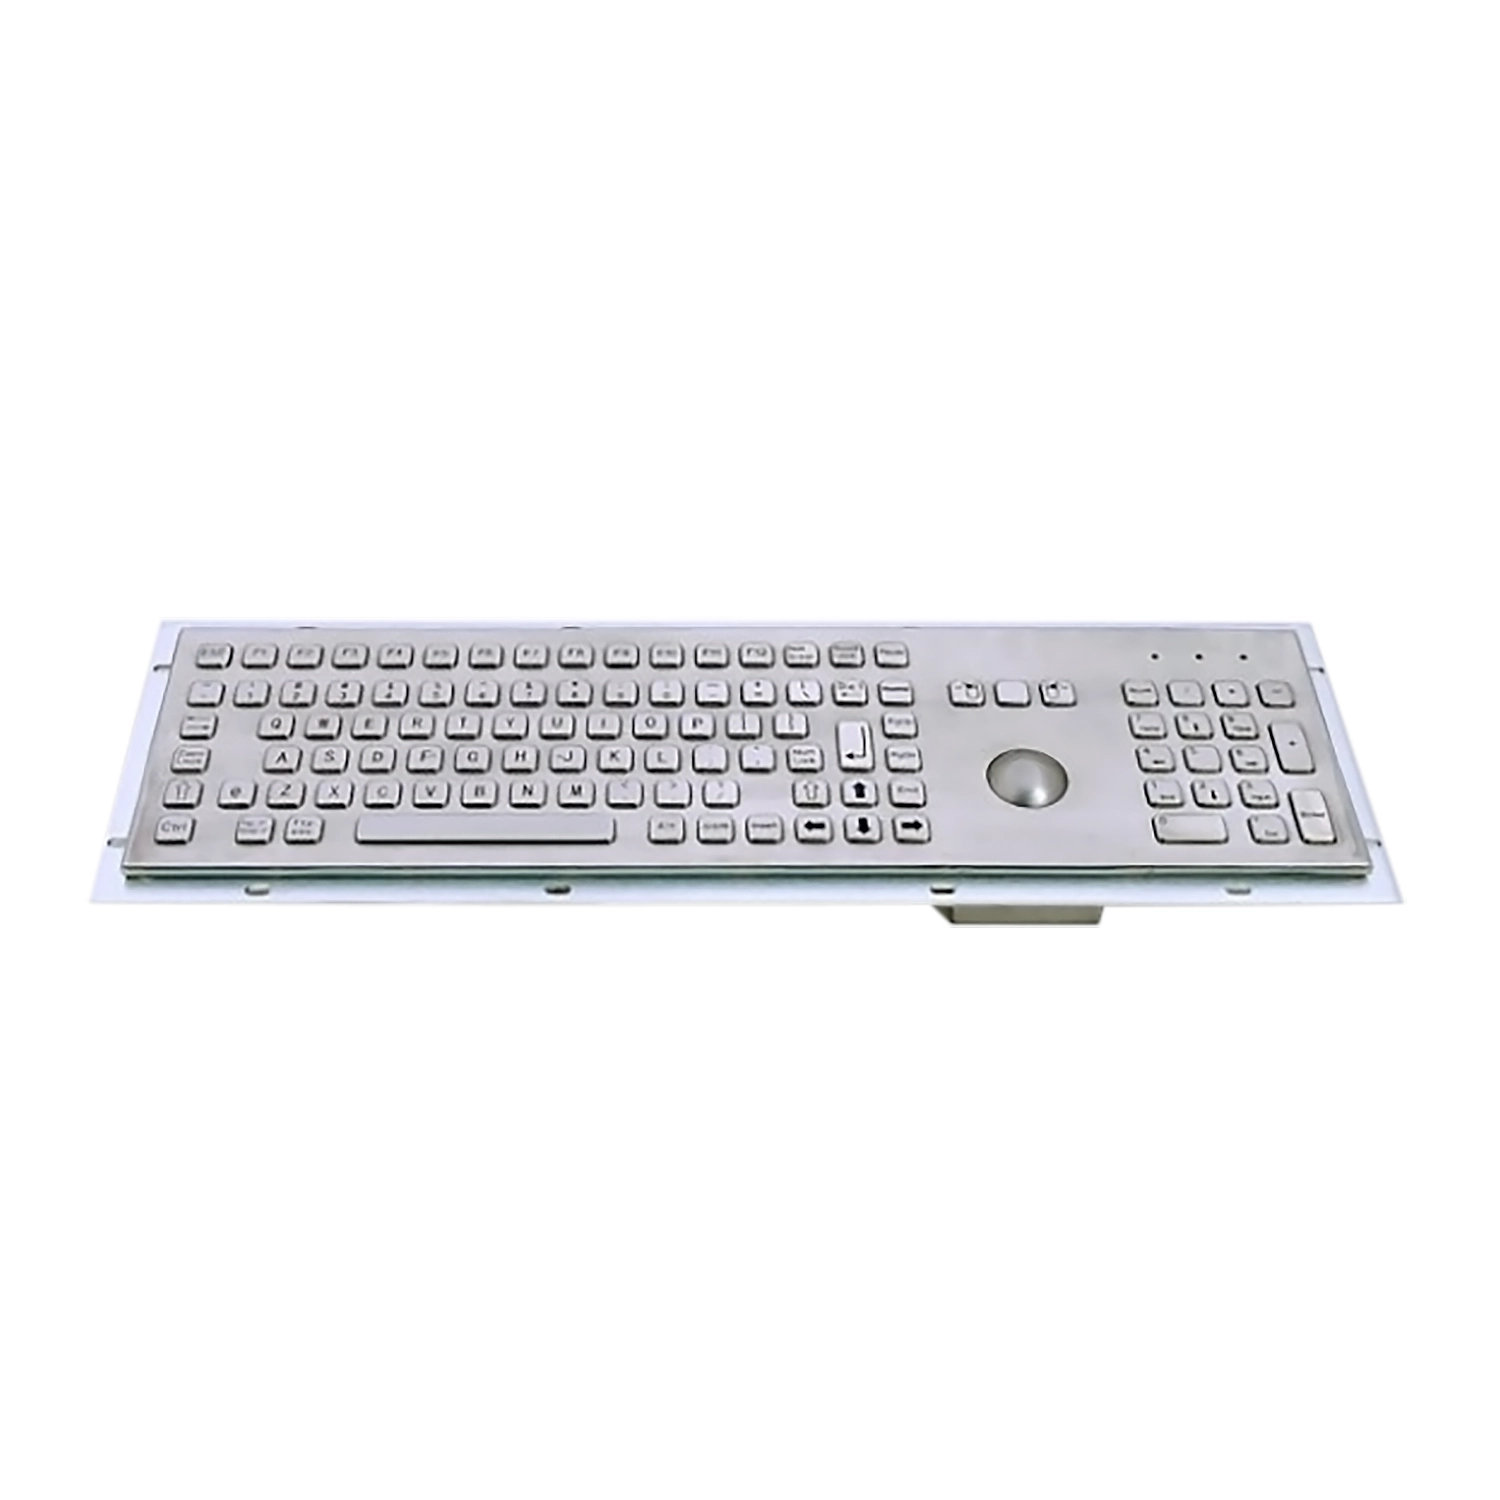 Rugged panel mount keyboard with trackball KB-000-NW0S0T6